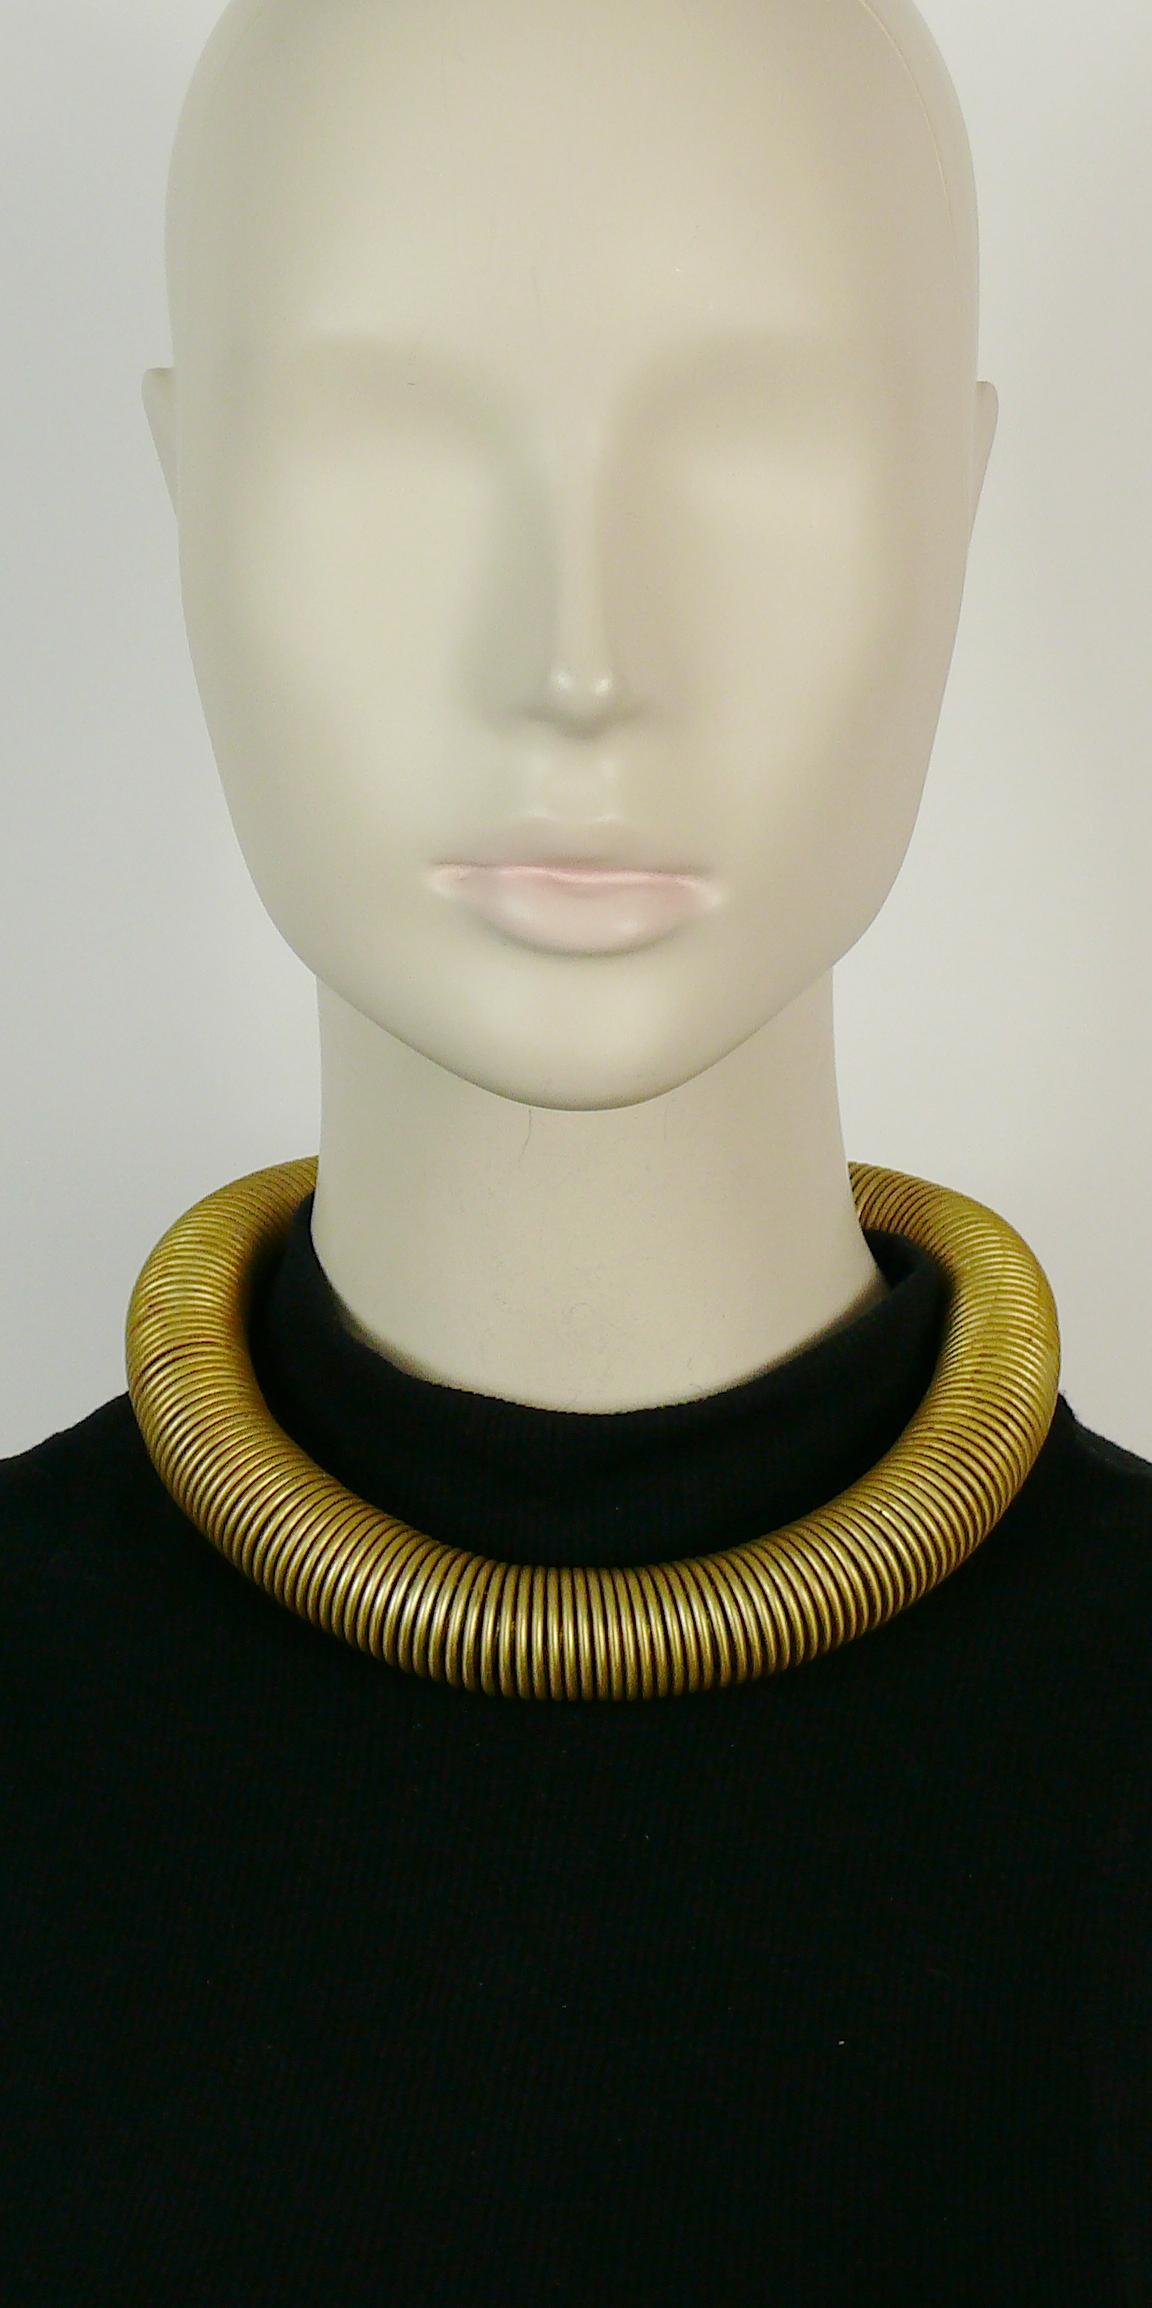 JEAN PAUL GAULTIER vintage chunky gold toned spring collar necklace.

Hook clasp closure.

Marked GAULTIER.

Indicative measurements : inner circumference approx. 39.90 cm (15.71 inches) / width approx. 2.3 cm (0.91 inch).

Has some weight on it